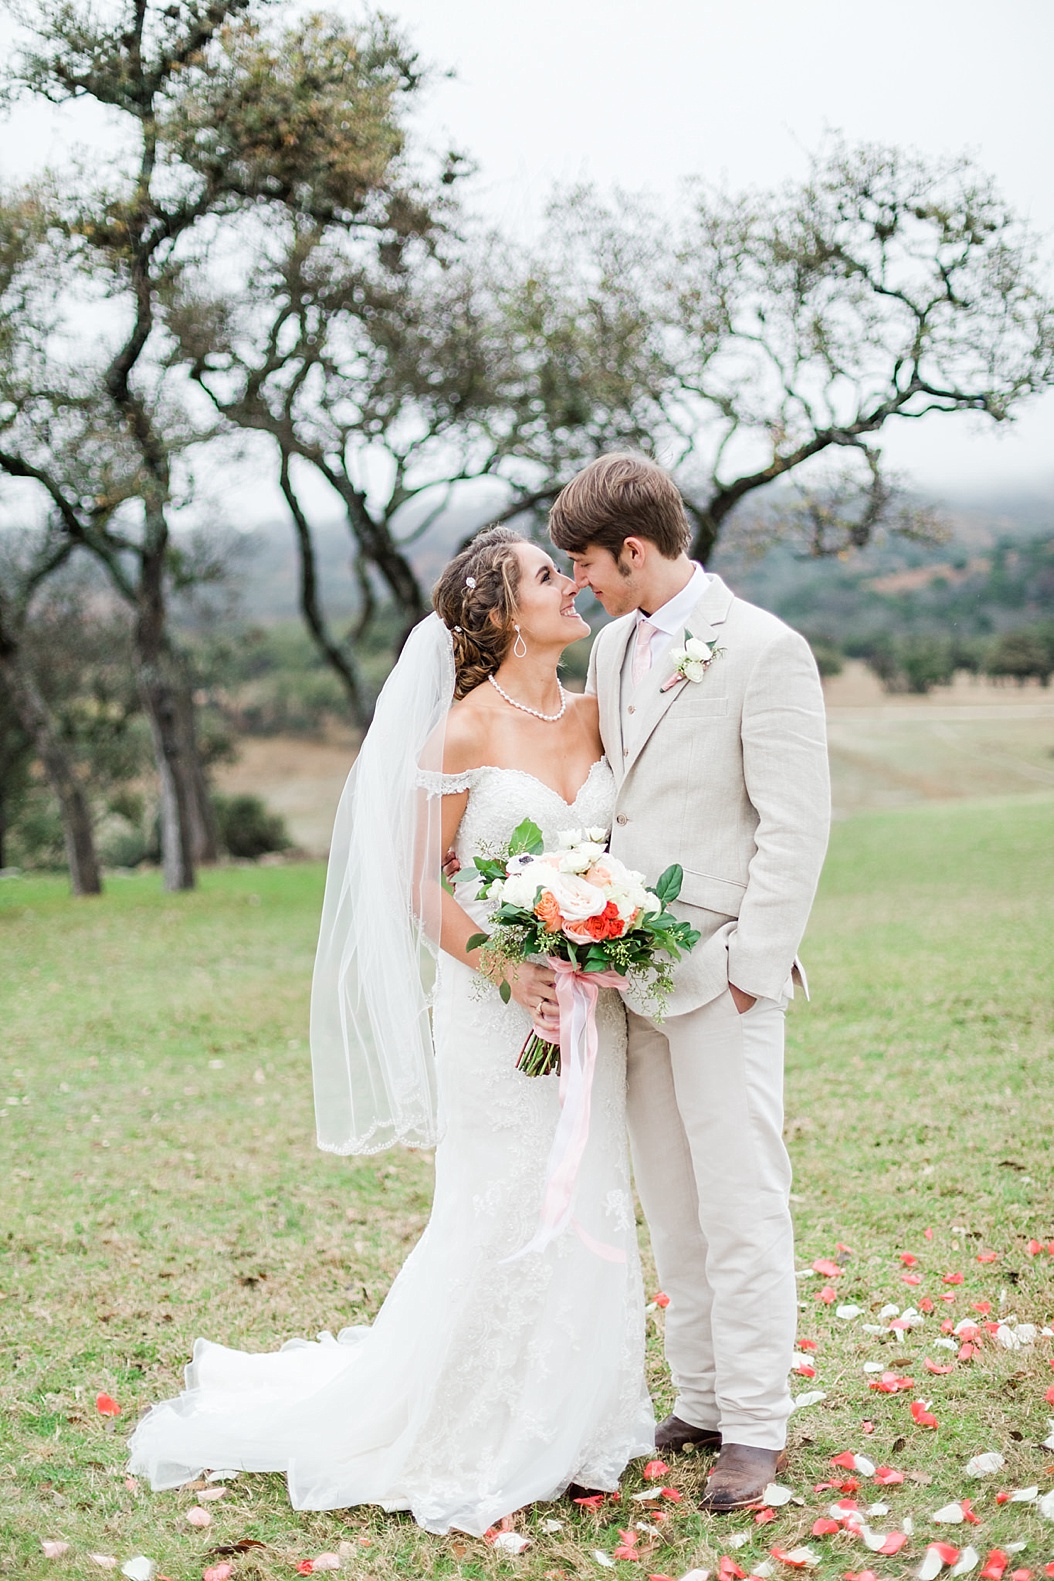 A Peach and Mint Country Chic Wedding at Happy H Ranch by Allison Jeffers Wedding Photography. Comfort Wedding Photographer 0074